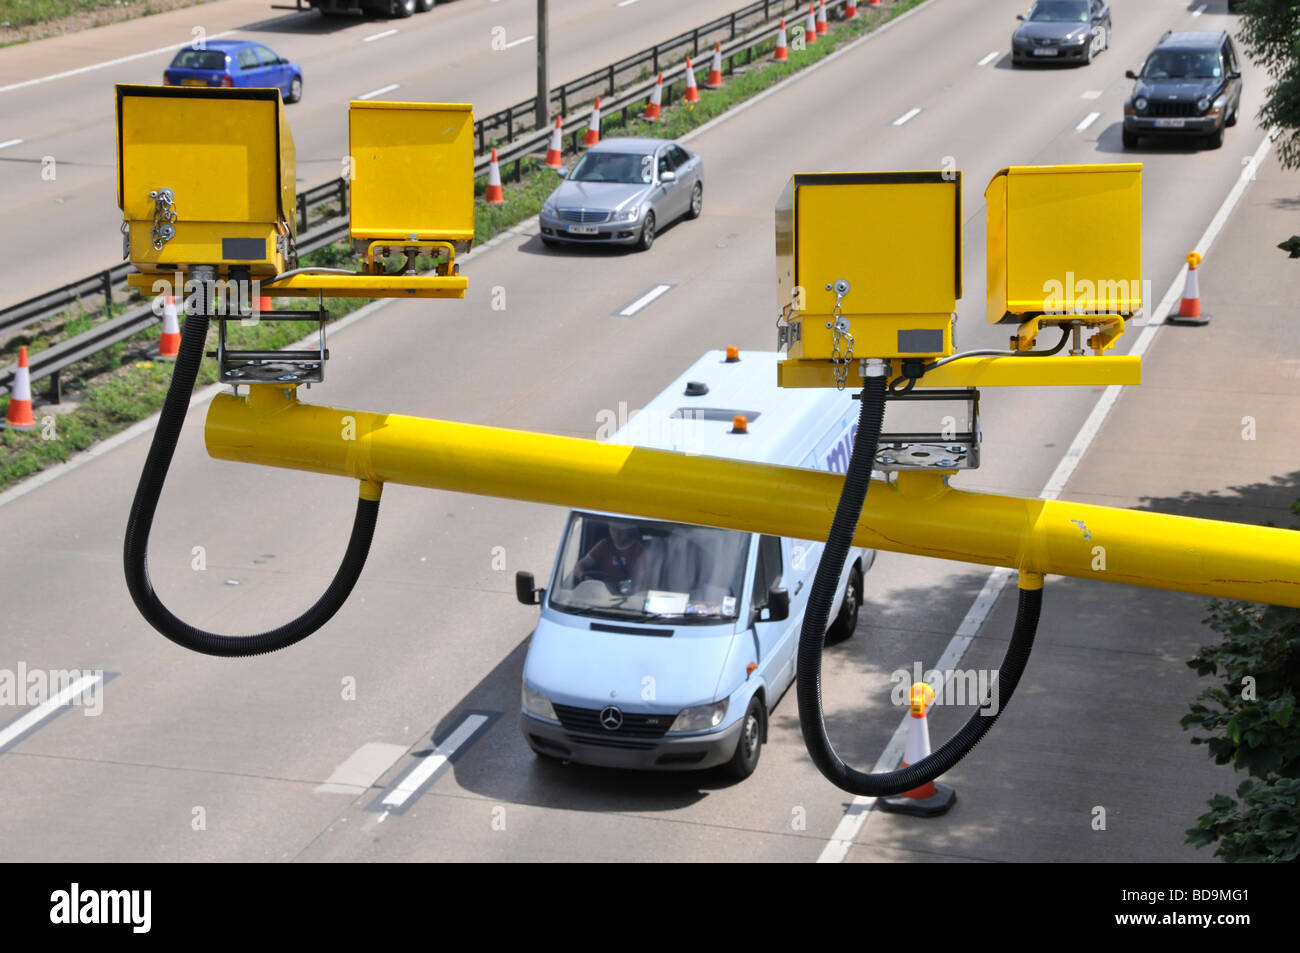 M25 motorway variable speed cameras monitoring traffic entering a roadworks section some van logos removed Stock Photo